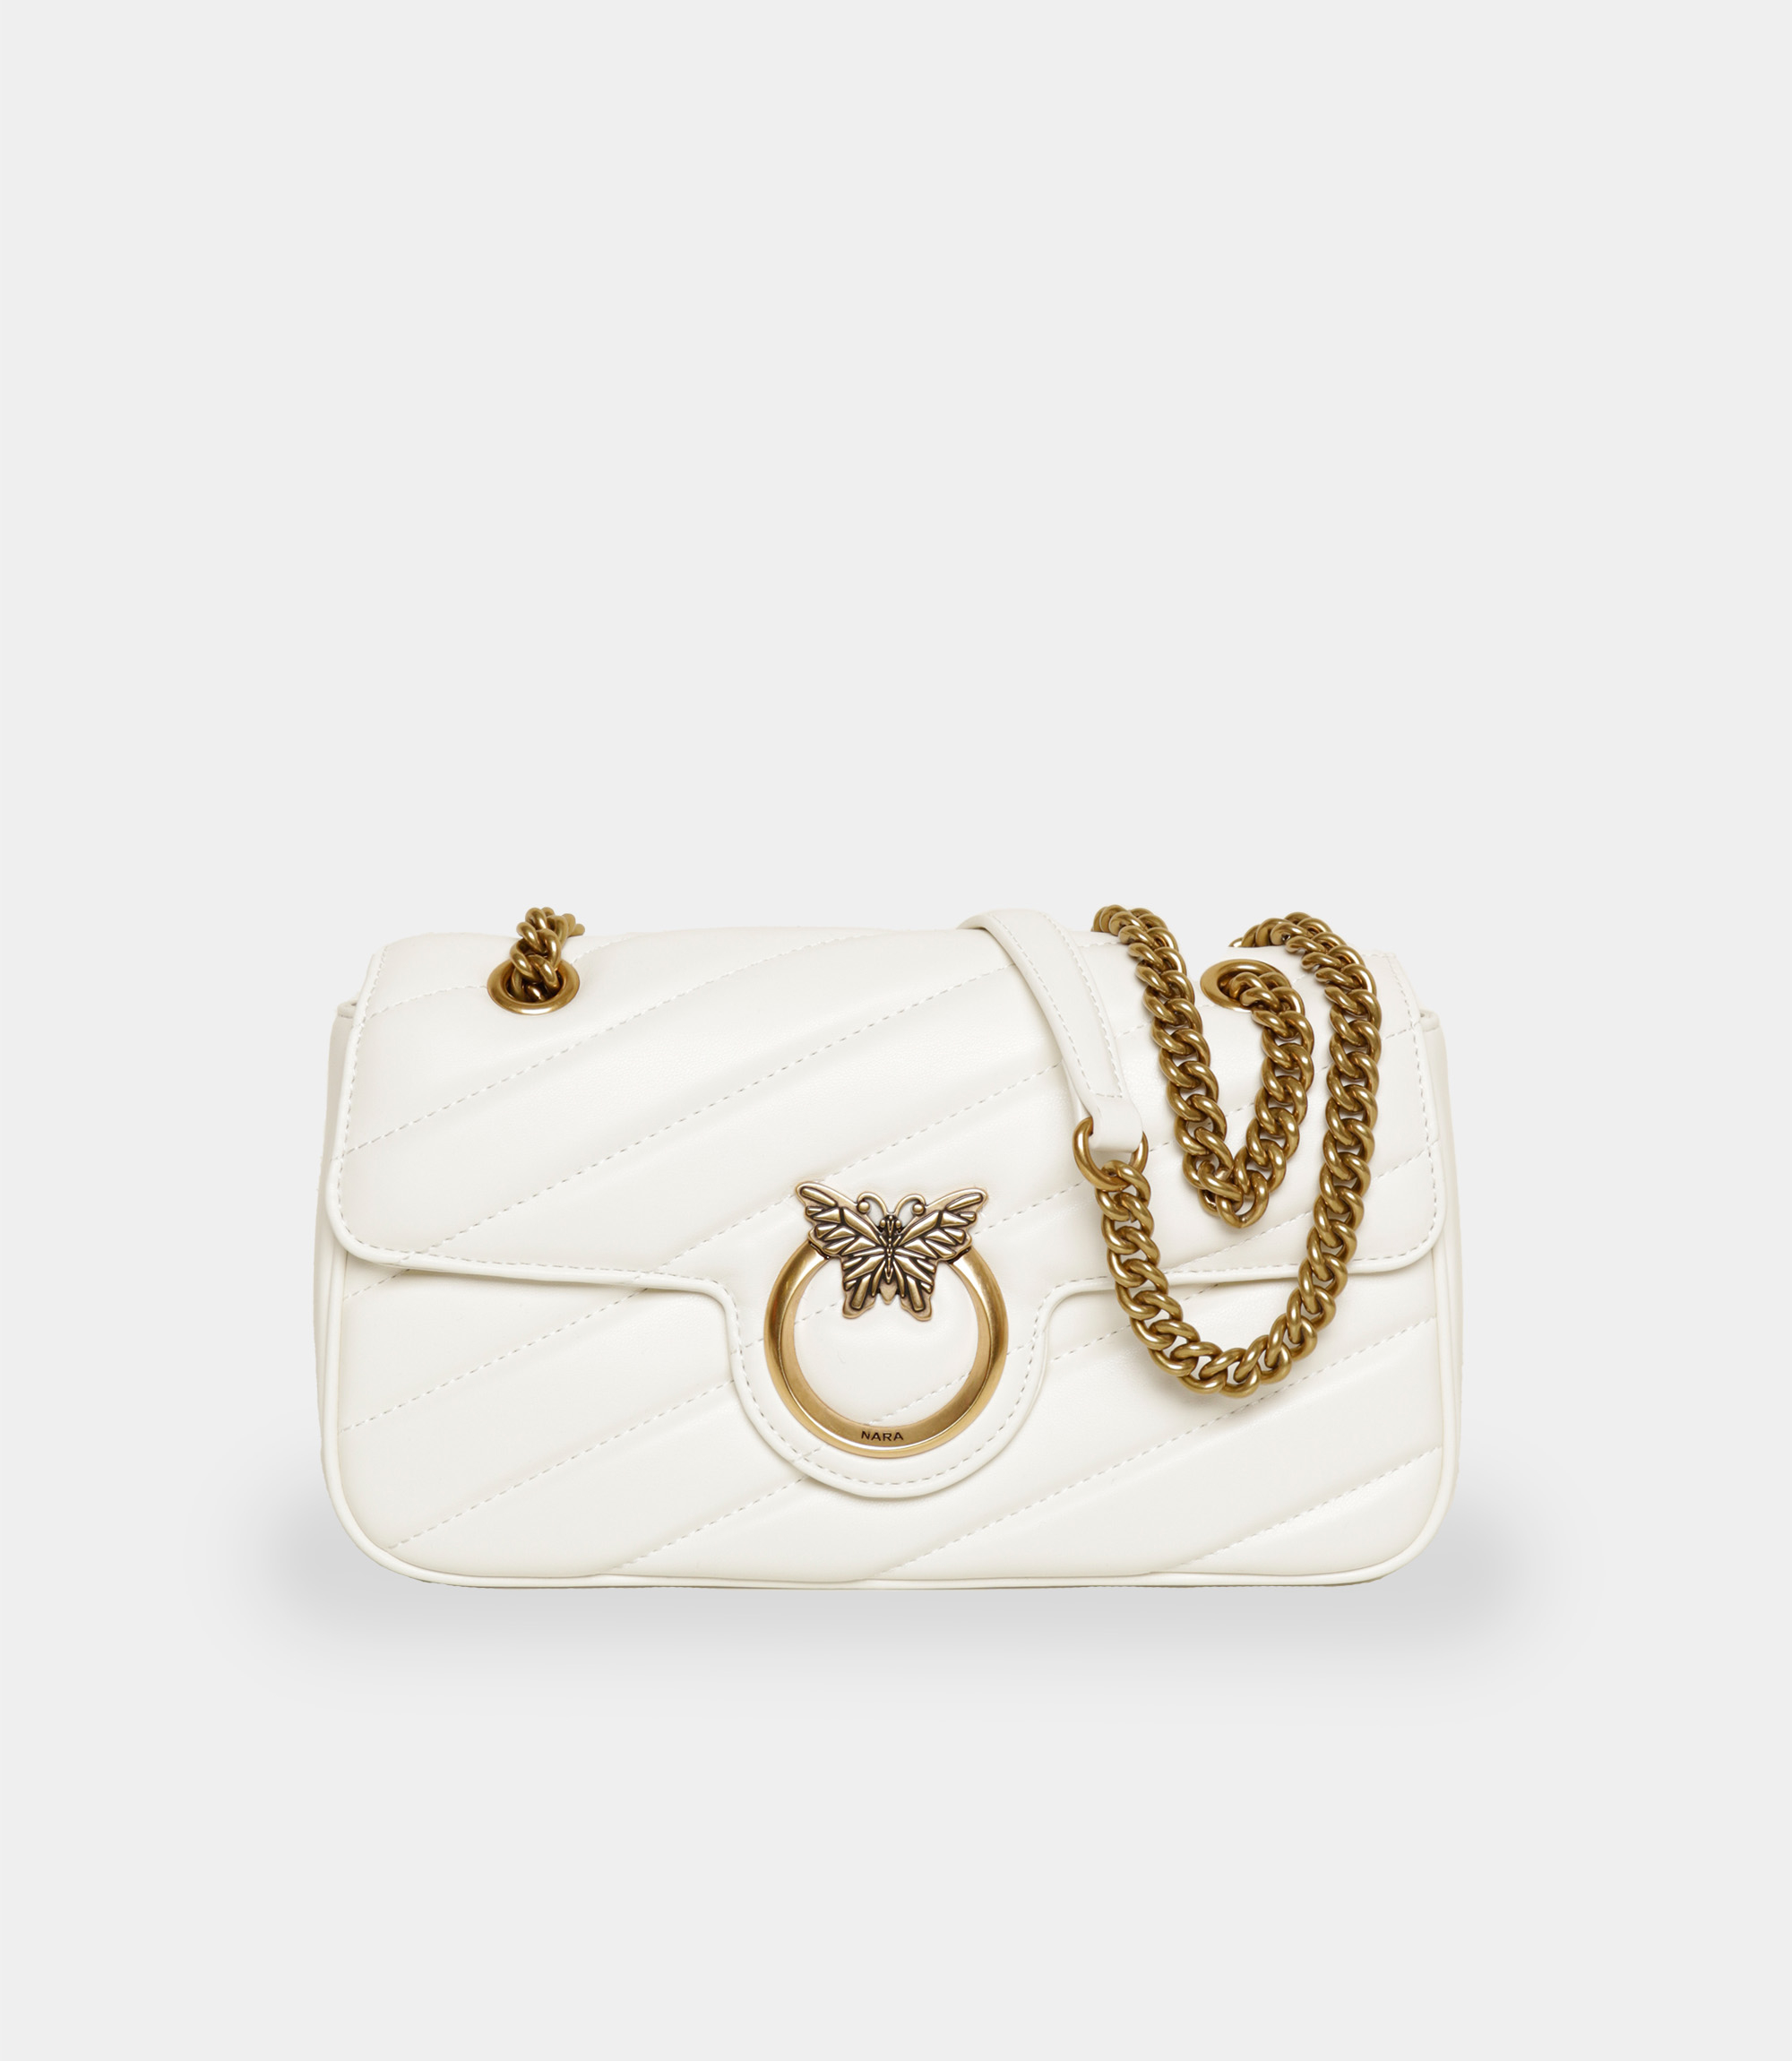 White handbag with quilted pattern - ACCESSORIES - NaraMilano